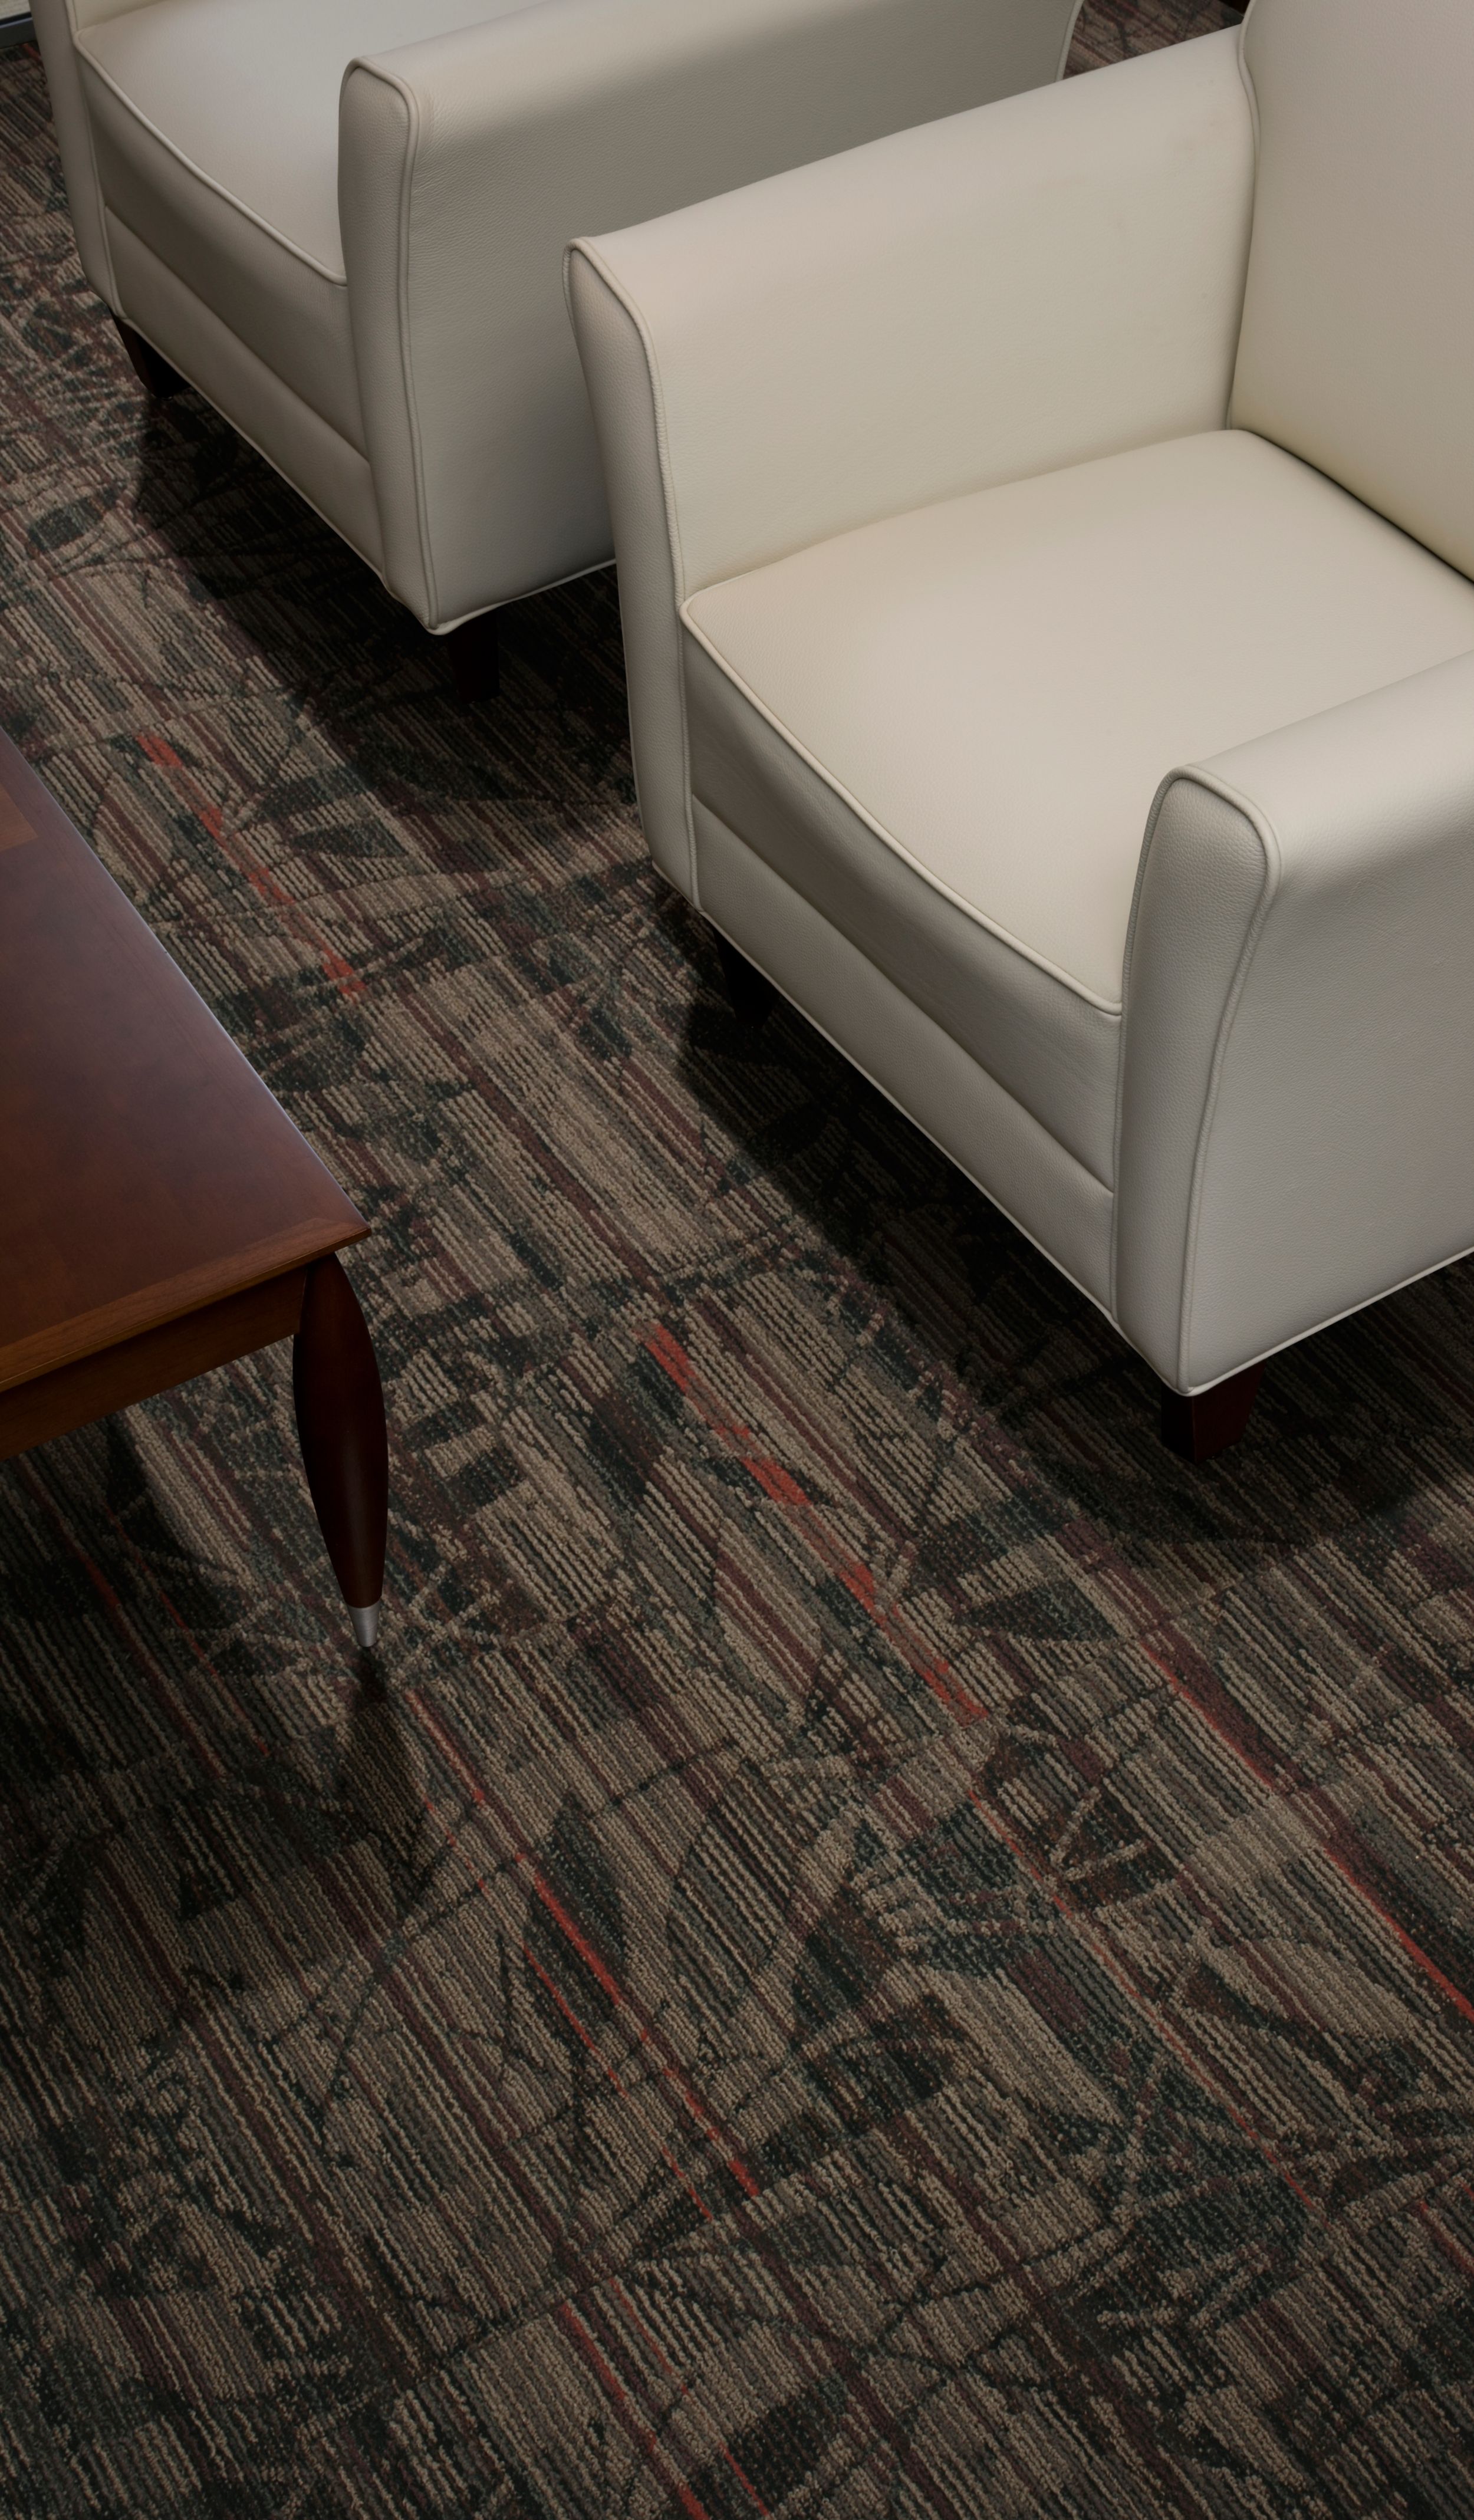 Interface Broadleaf carpet tile in seating area with two cream chairs and wood table numéro d’image 13